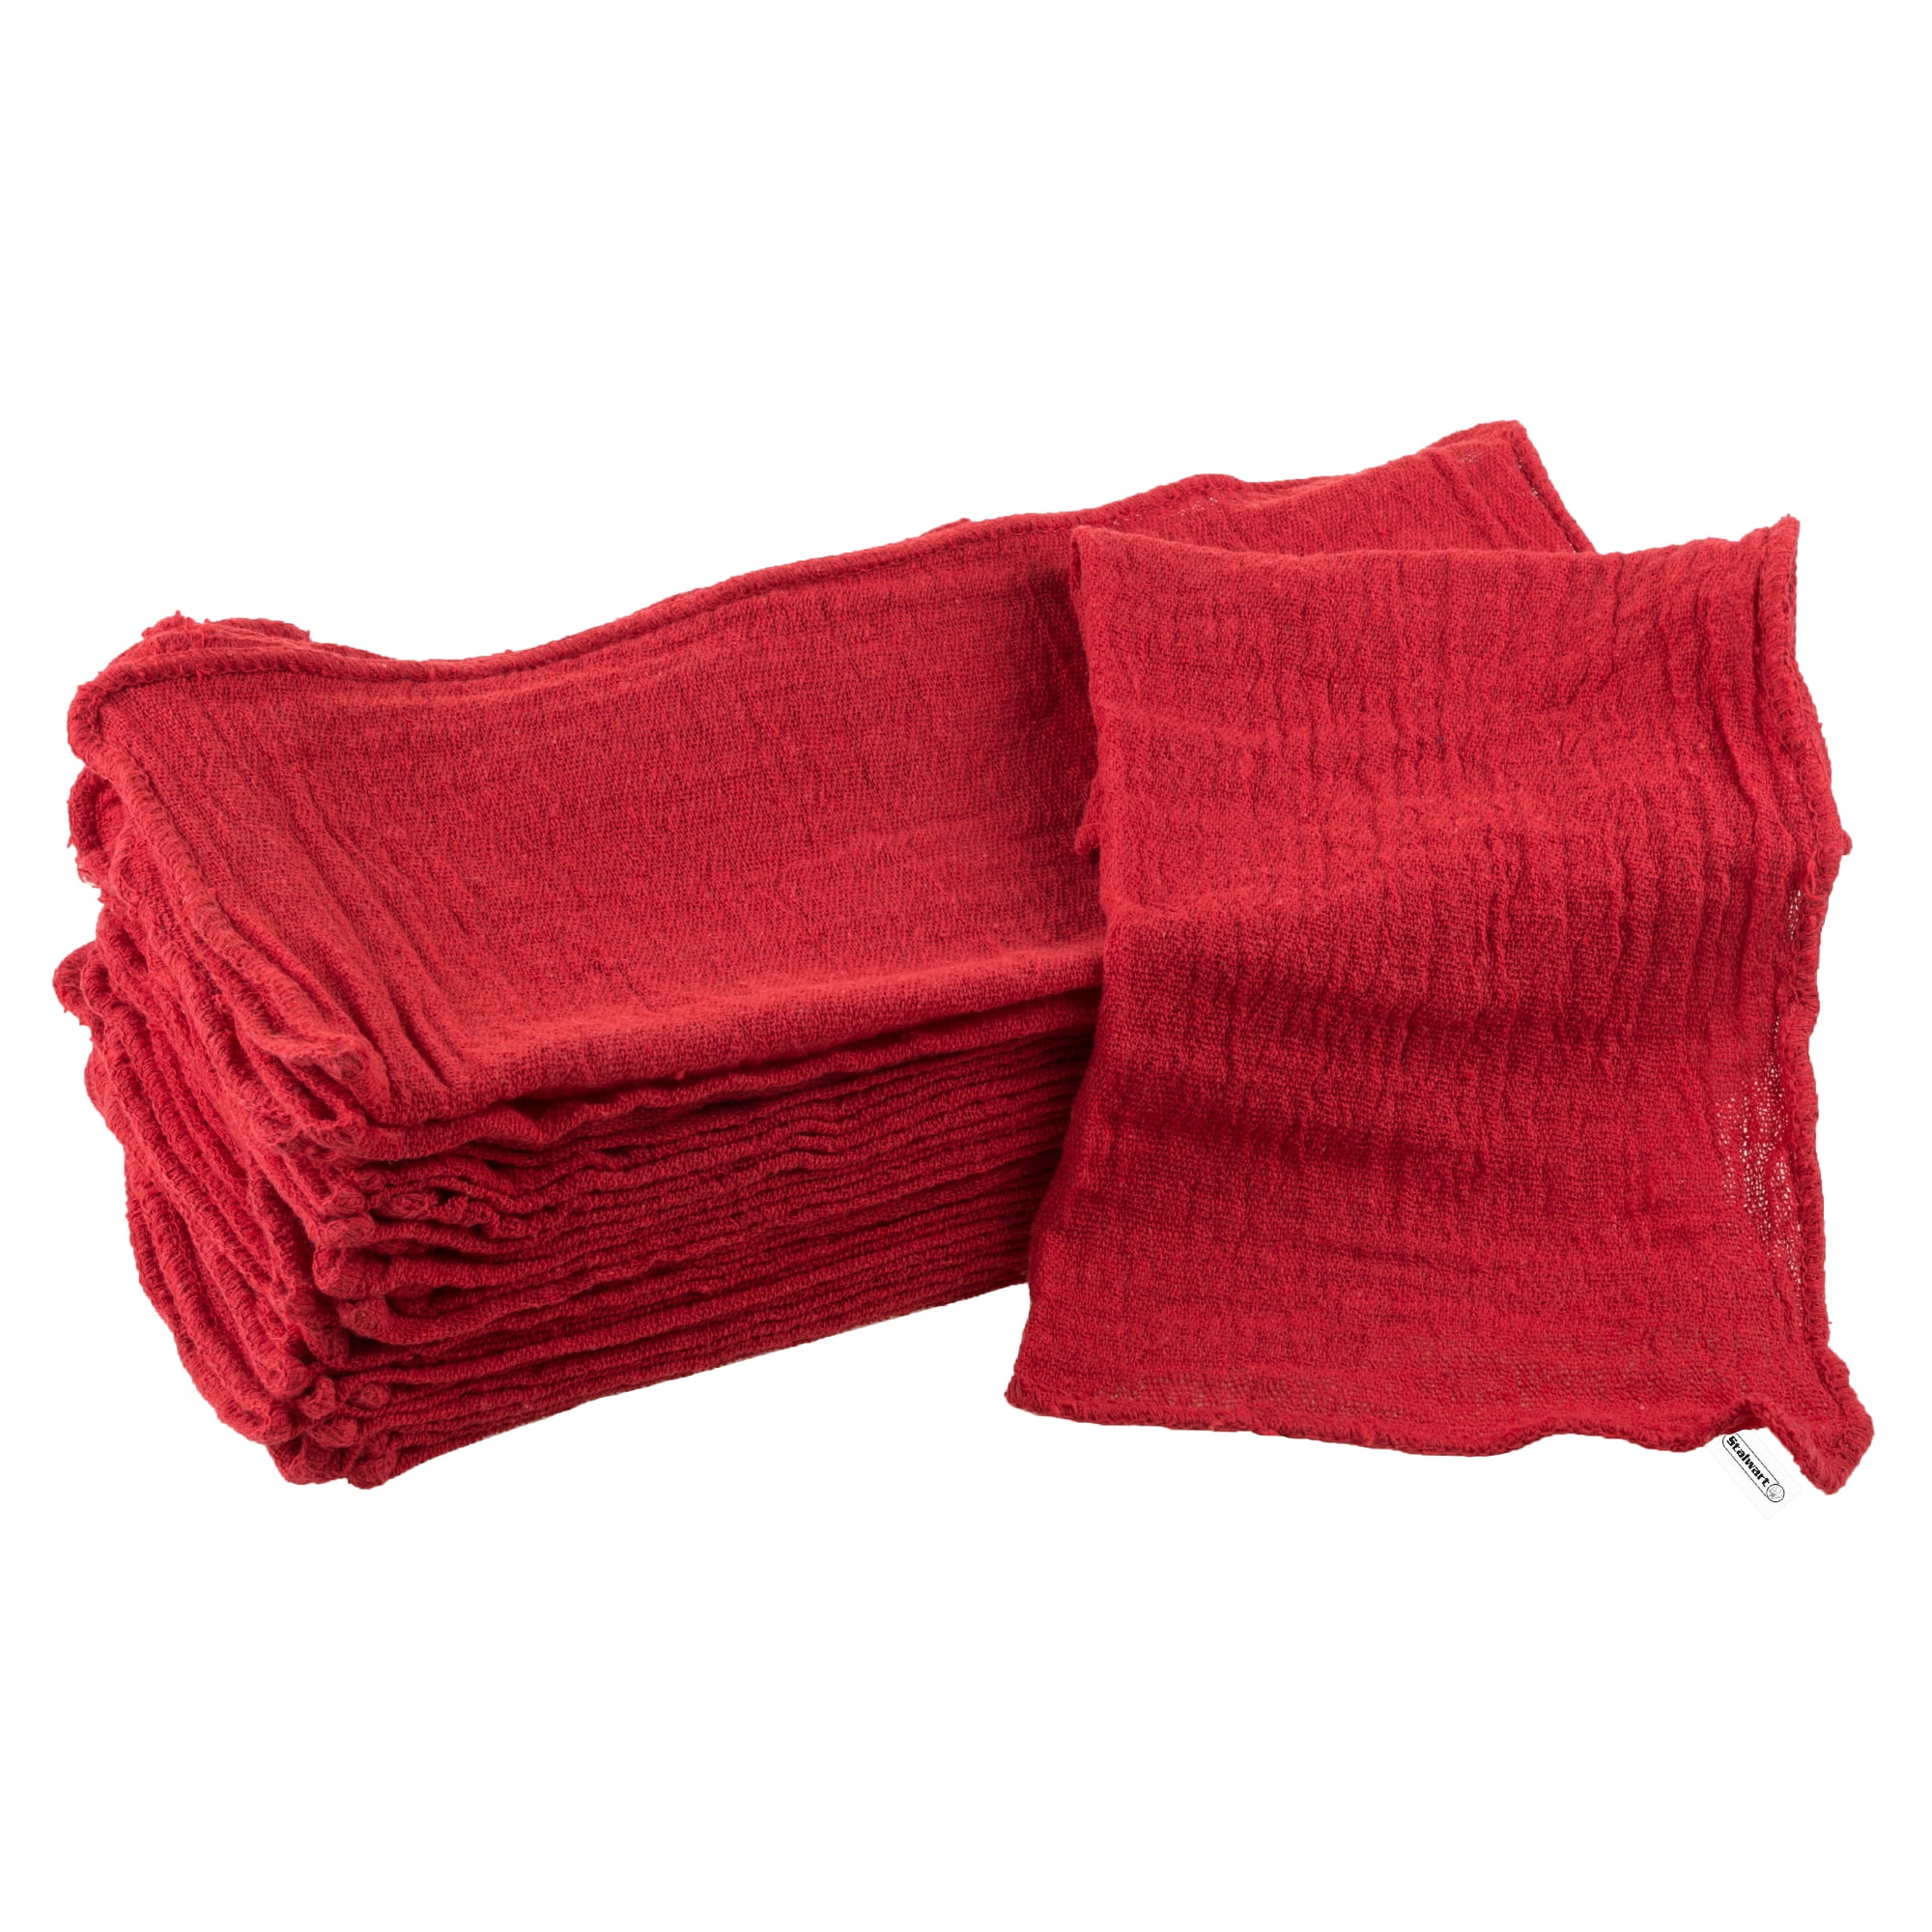 100pk INDUSTRIAL SHOP RAG CLEANING TOWELS RED NEW MECHANIC AUTO SHOP COMMERCIAL 